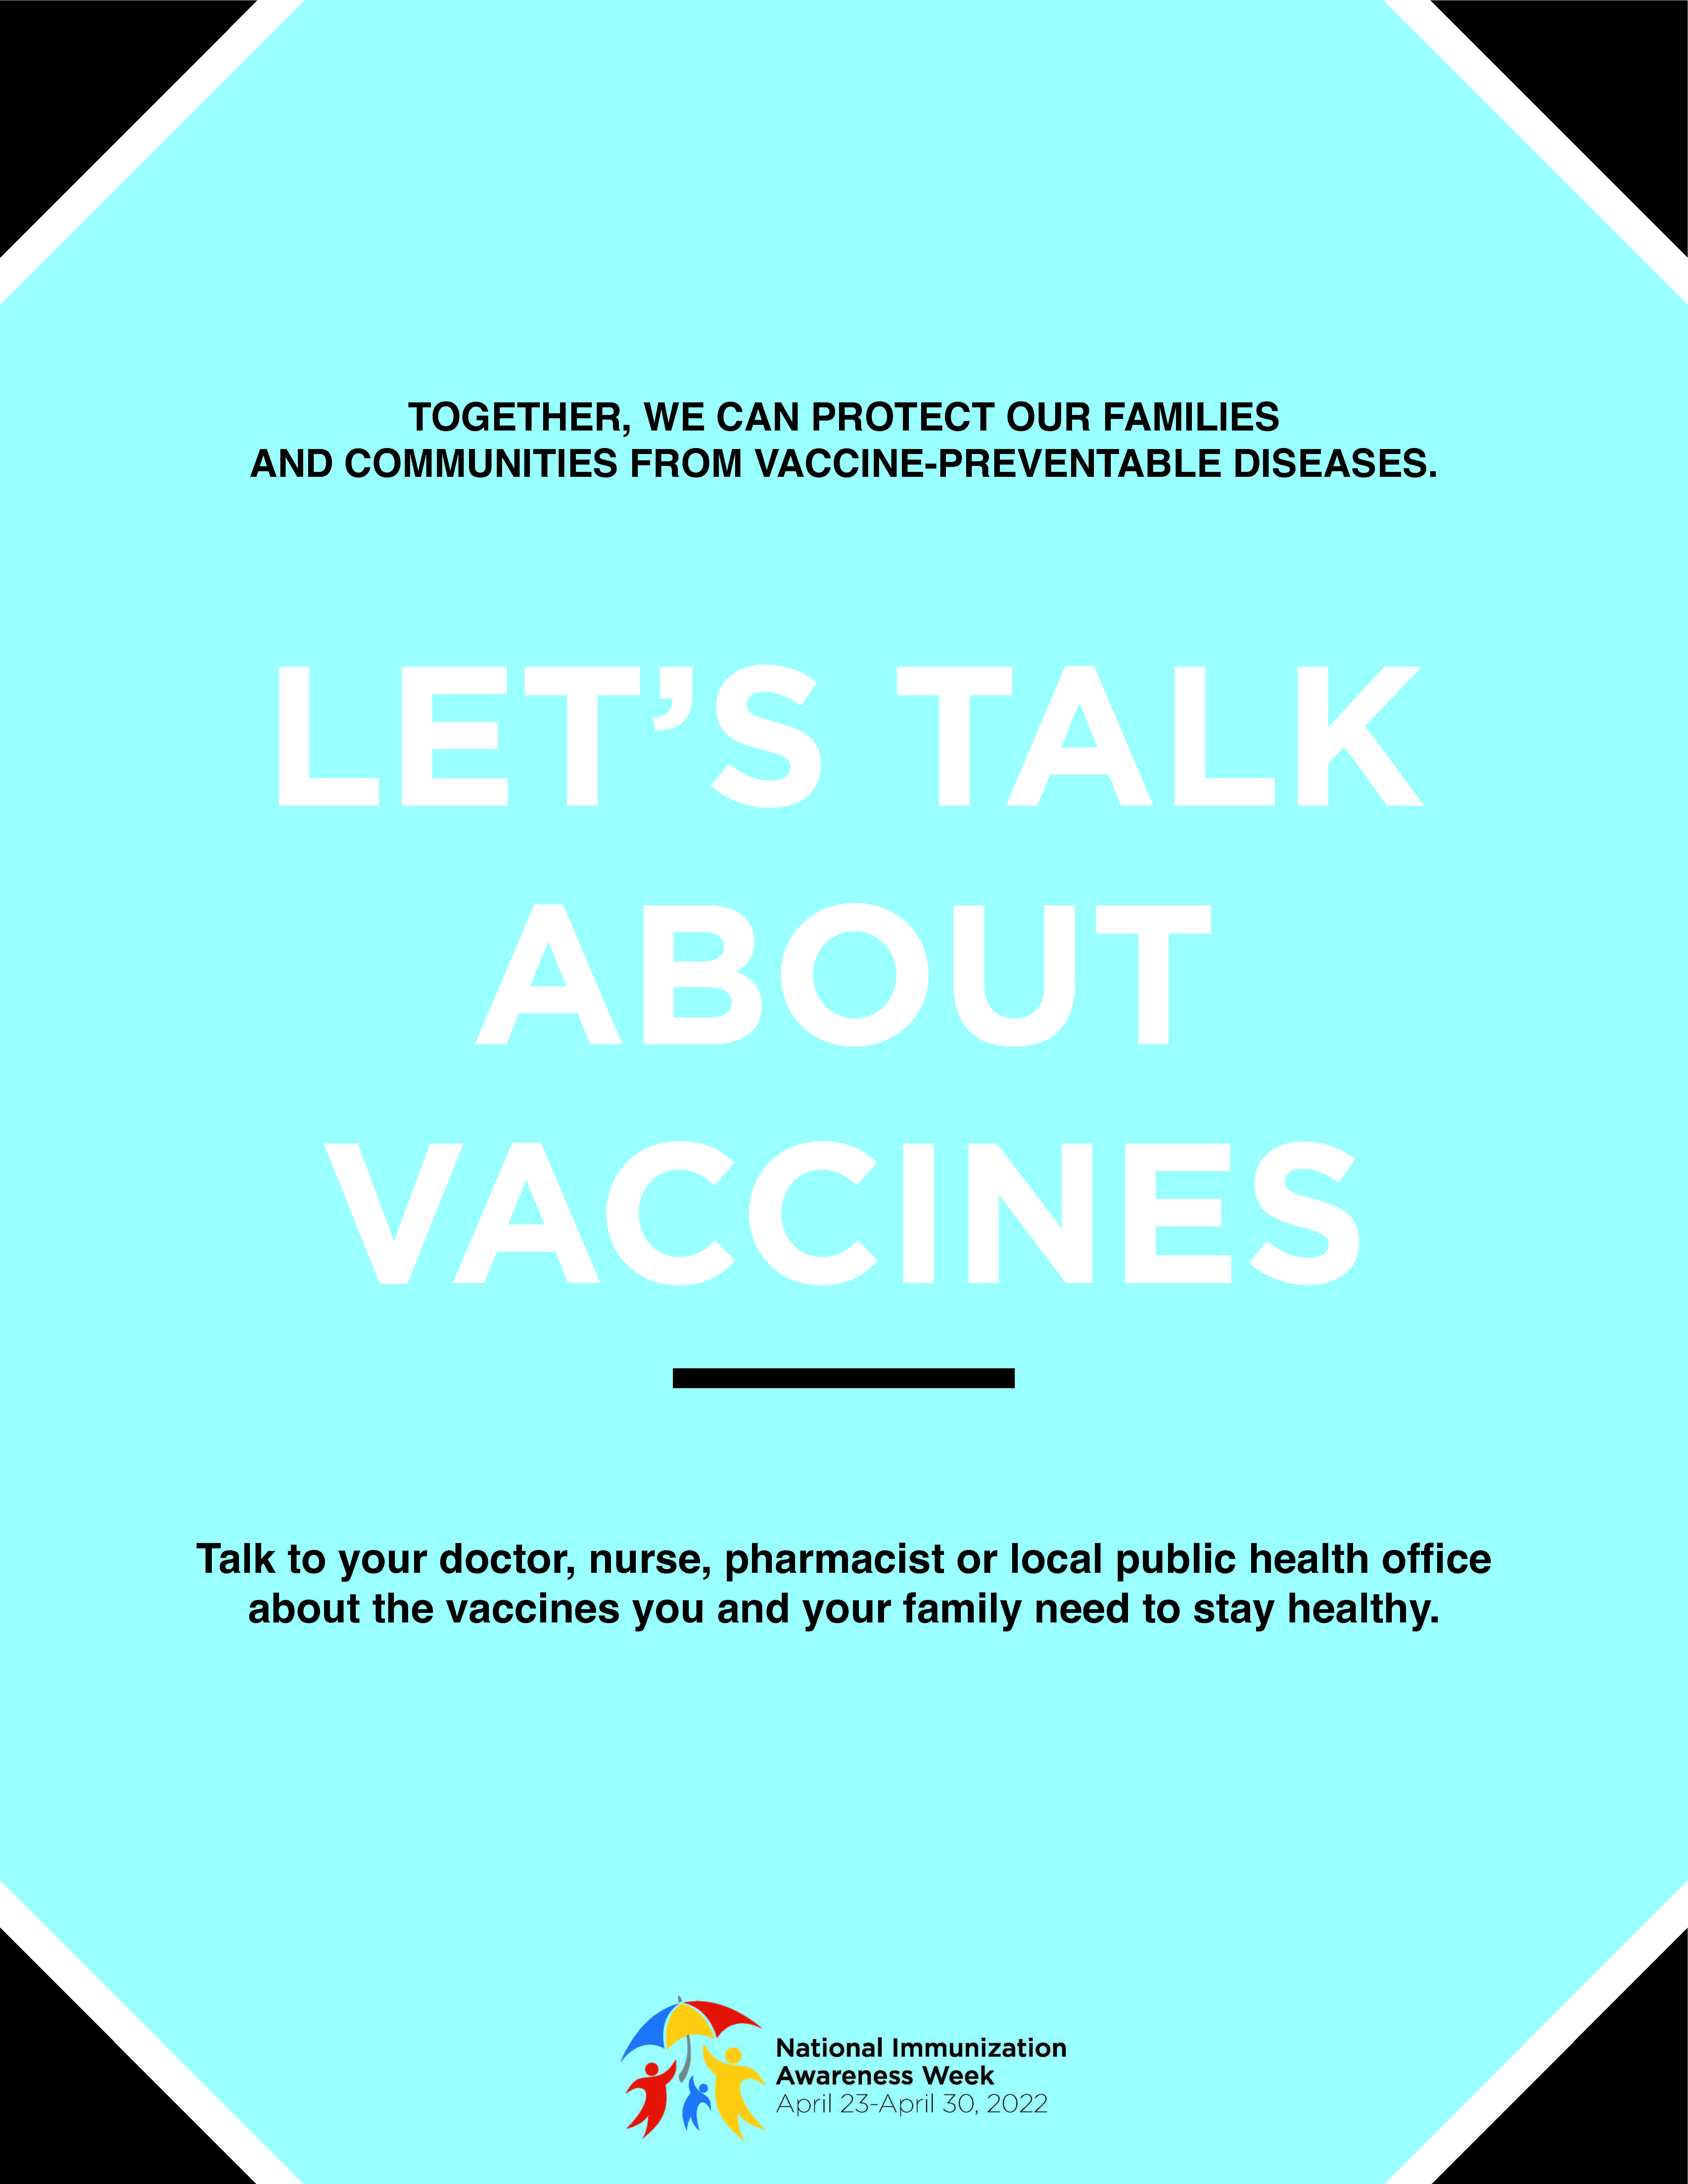 Let's talk about vaccines - customizable poster